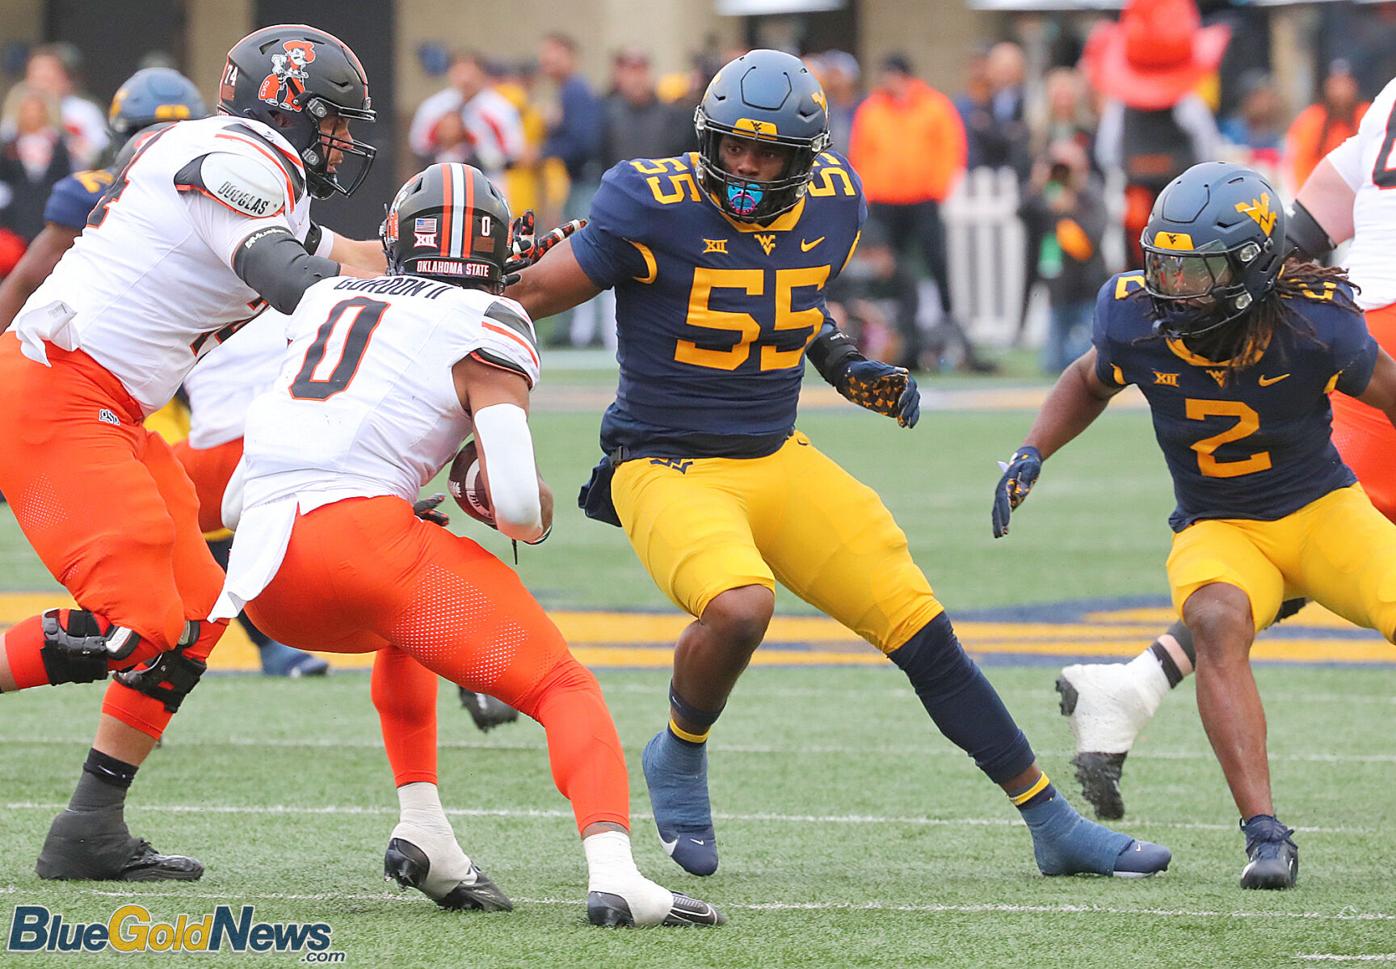 Grading the Mountaineers: Oklahoma State pulls away from WVU in